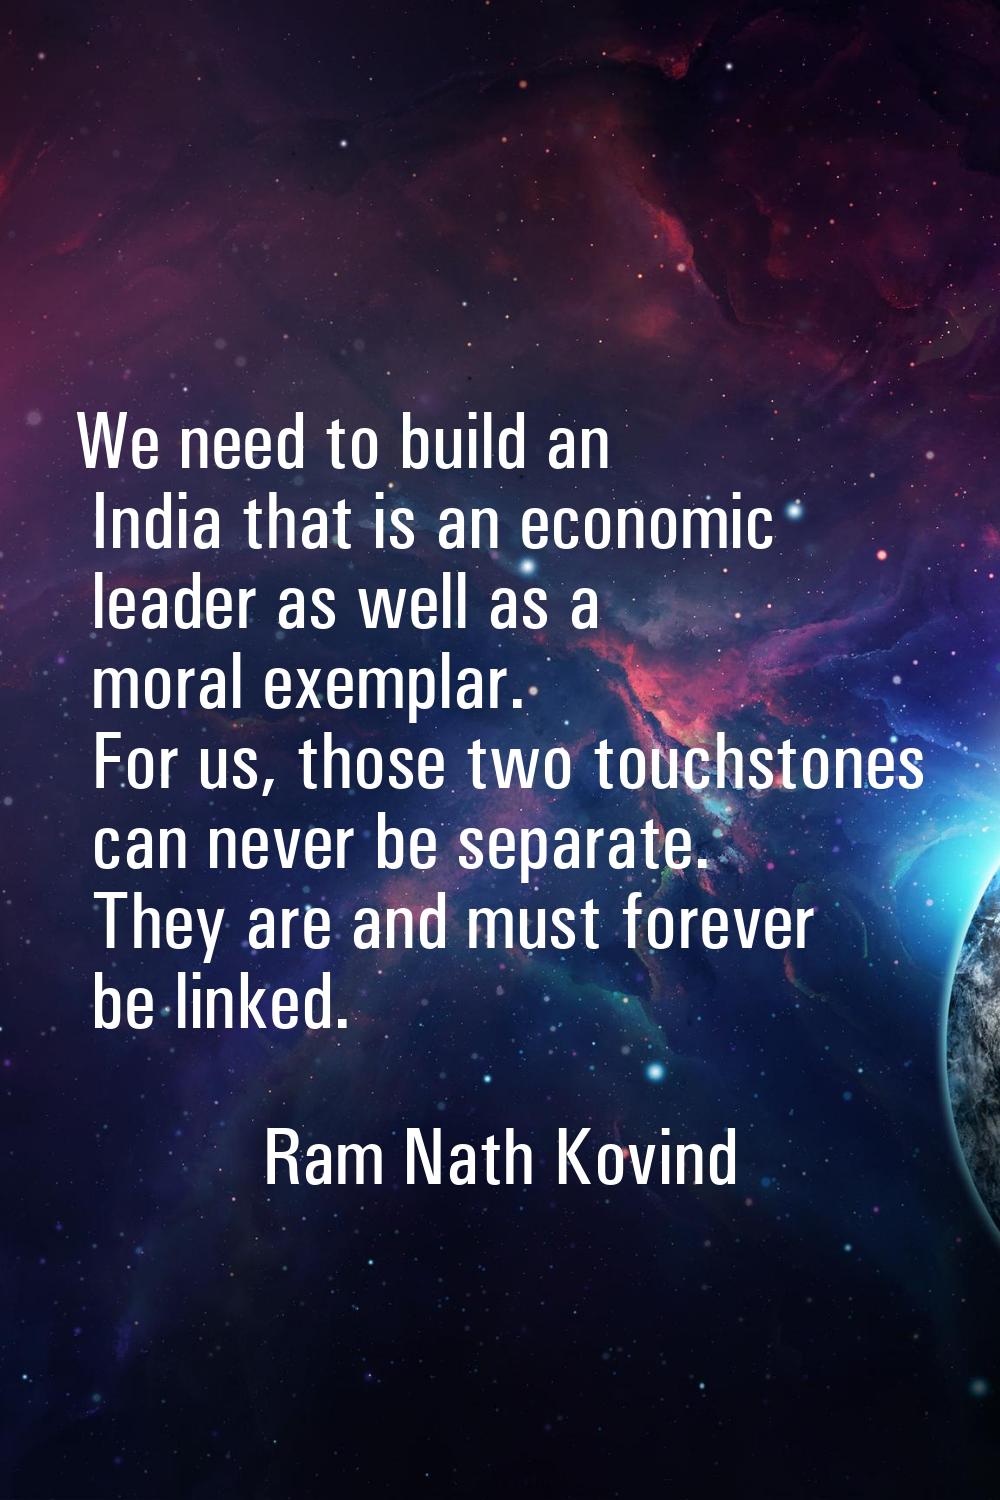 We need to build an India that is an economic leader as well as a moral exemplar. For us, those two